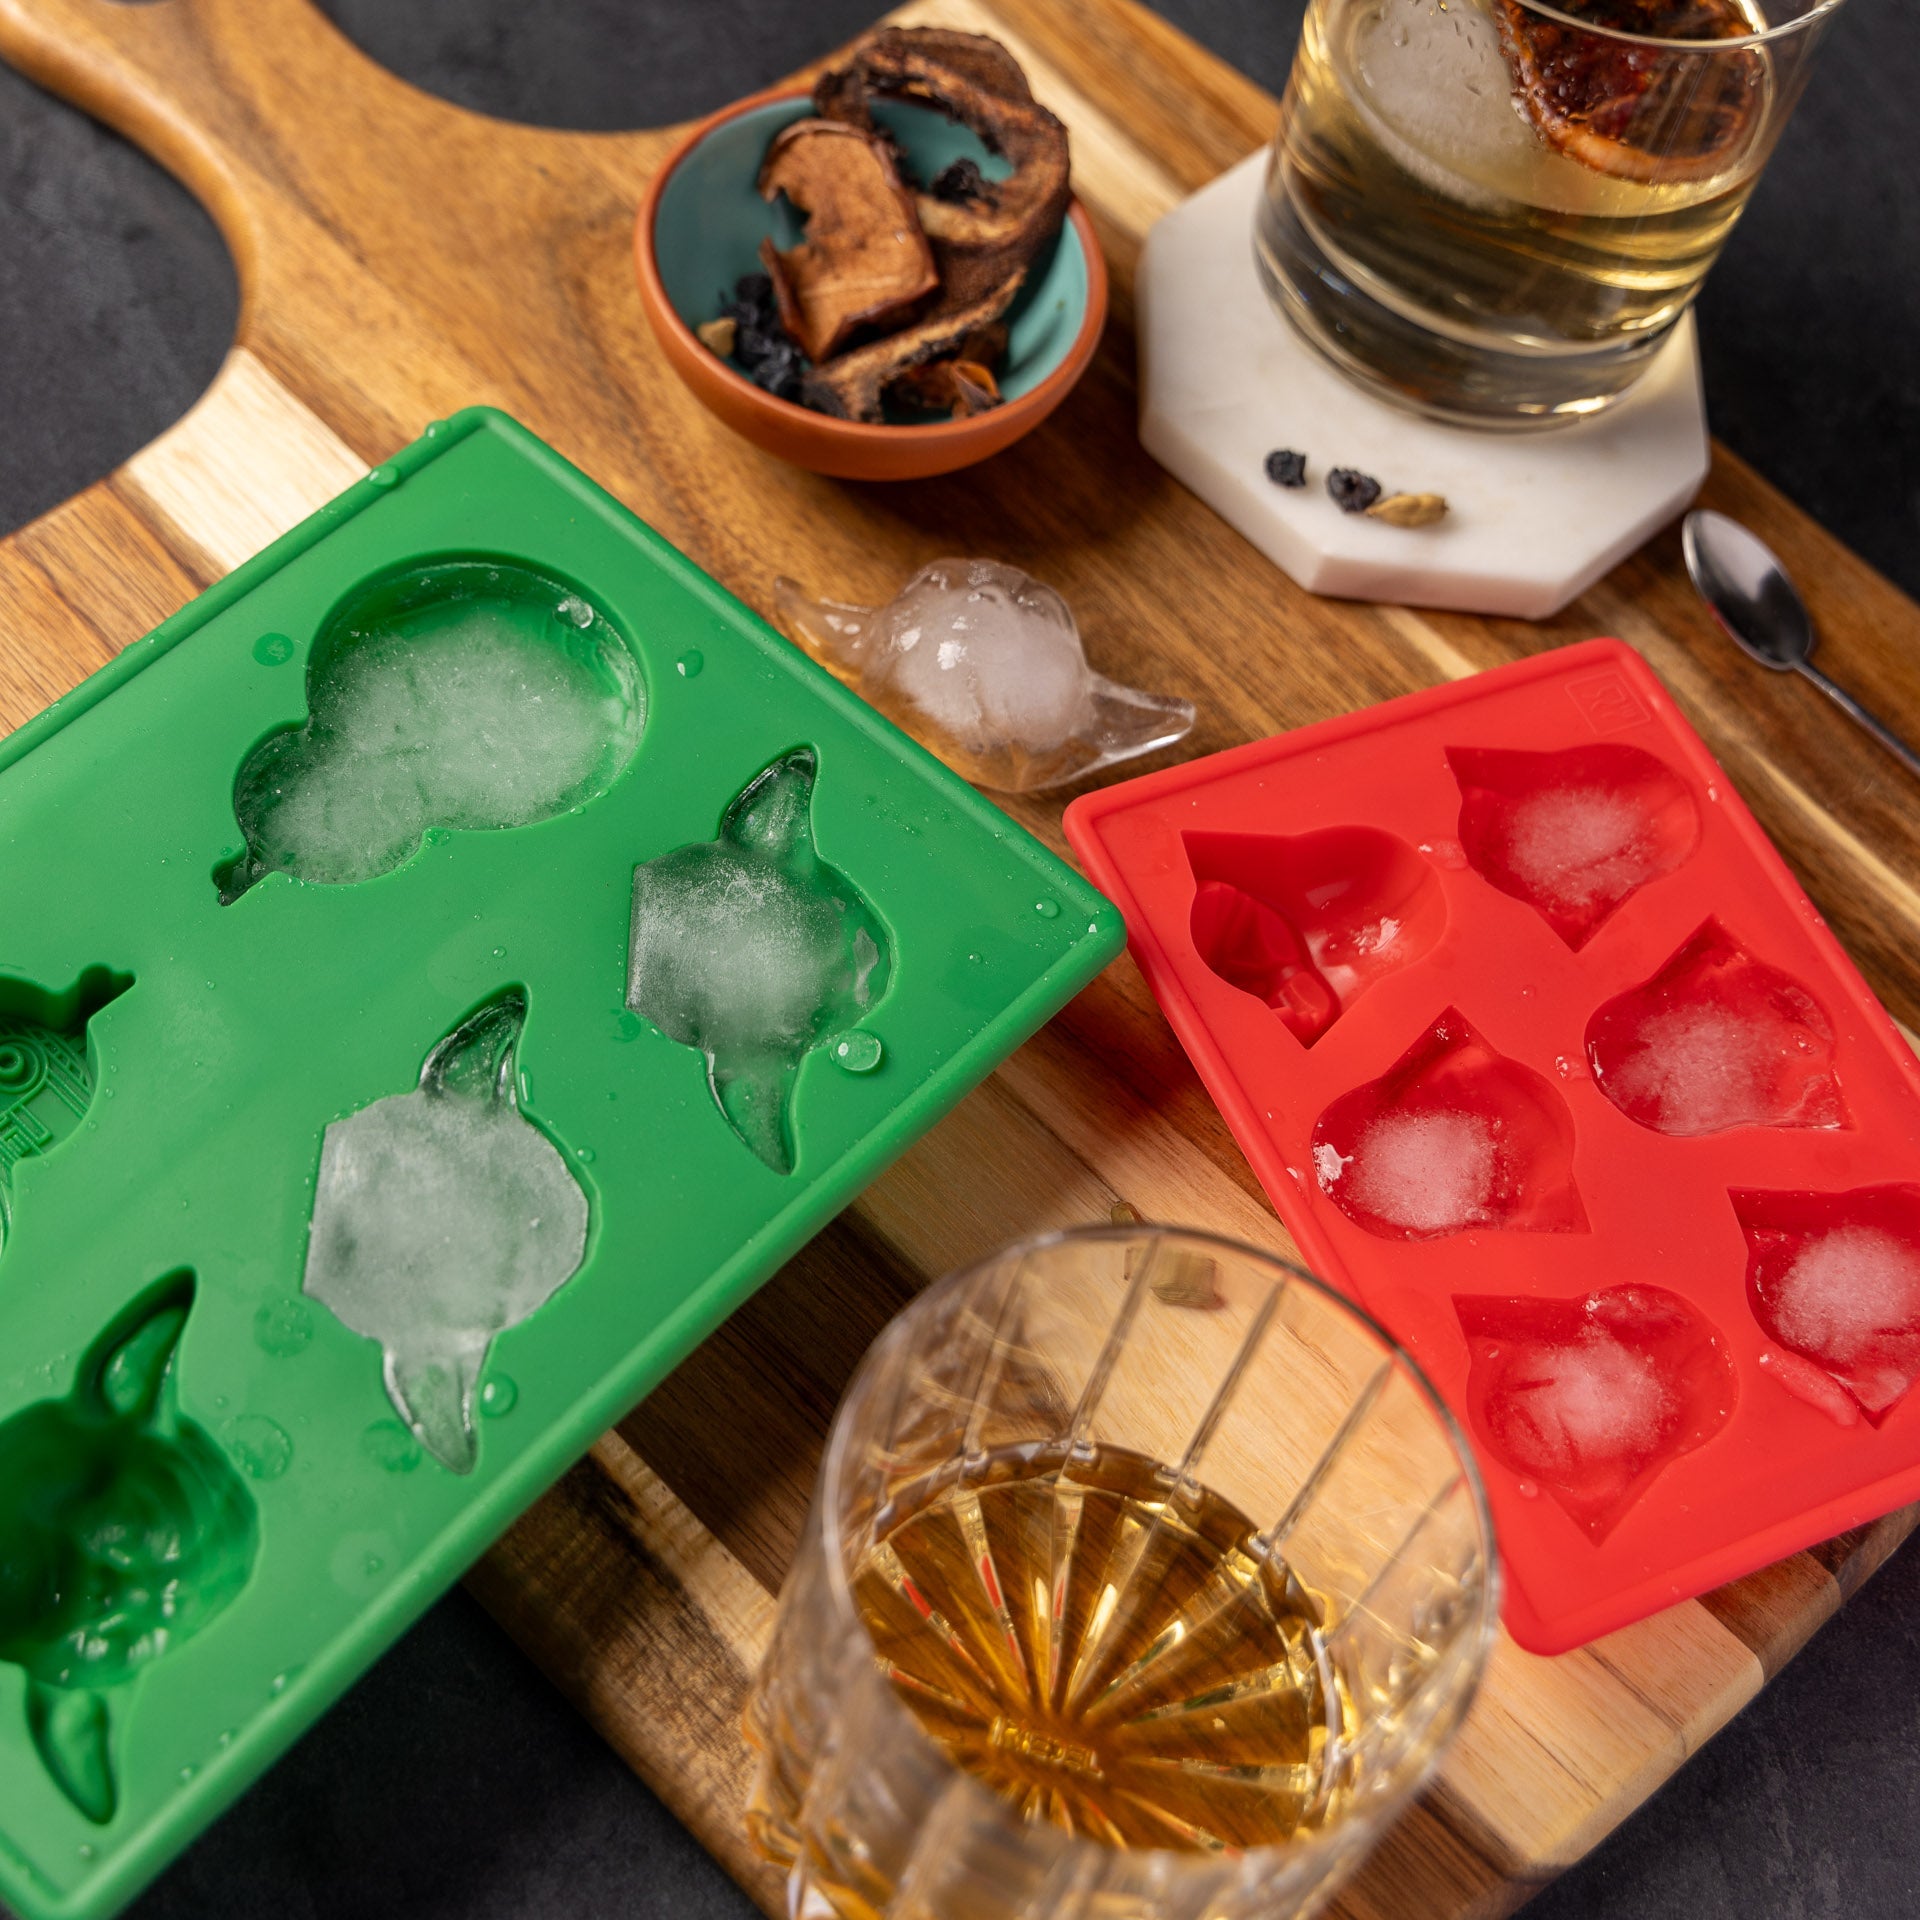 Star Wars Themed Ice Moulds